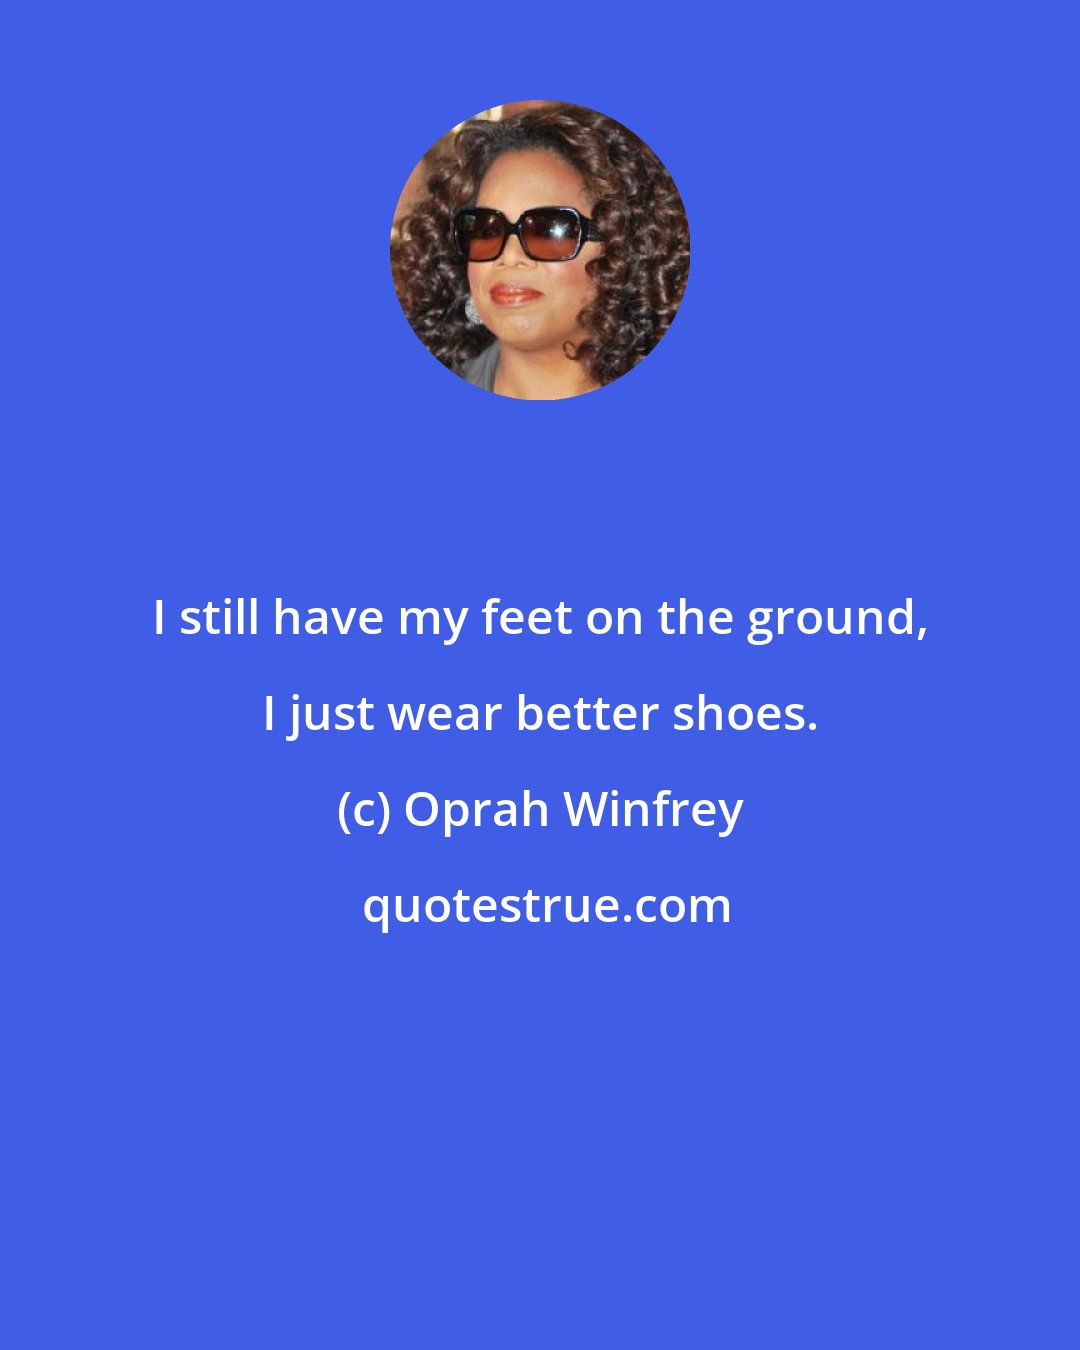 Oprah Winfrey: I still have my feet on the ground, I just wear better shoes.